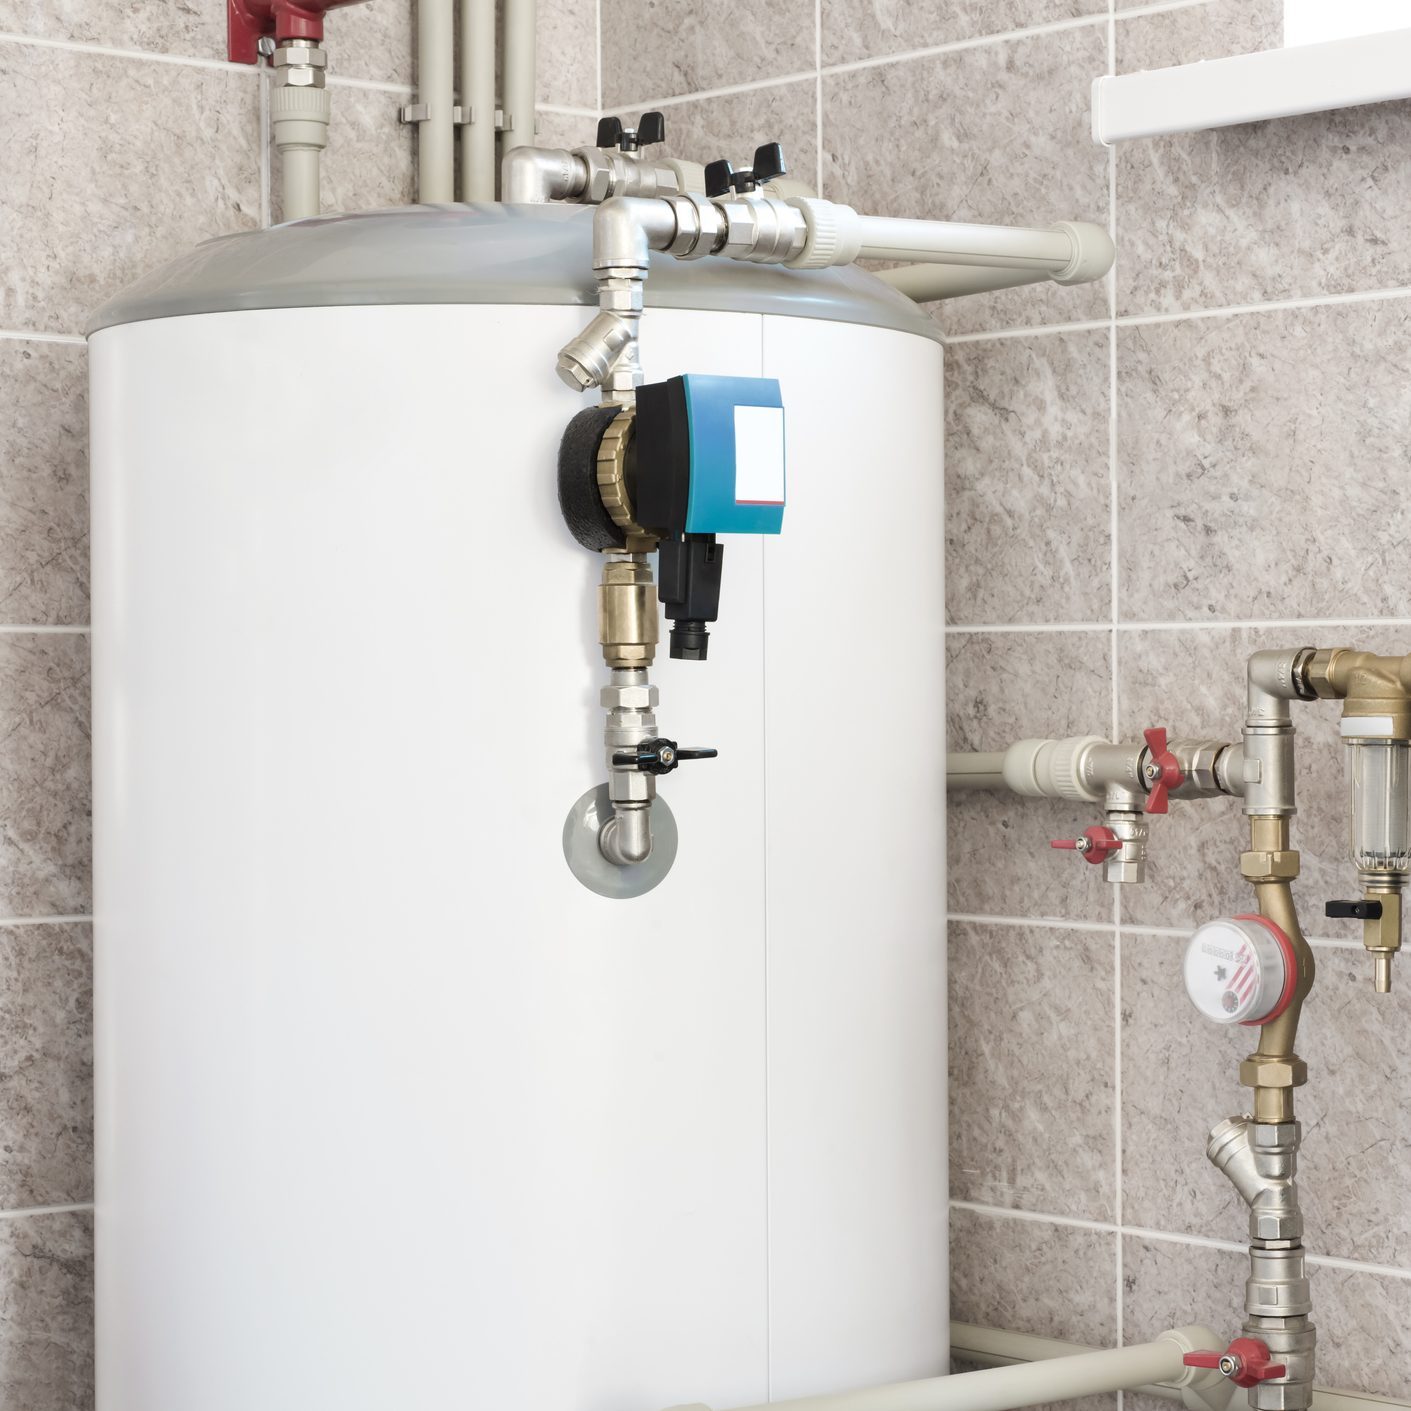 What is the Life Expectancy of a Hot Water Tank?